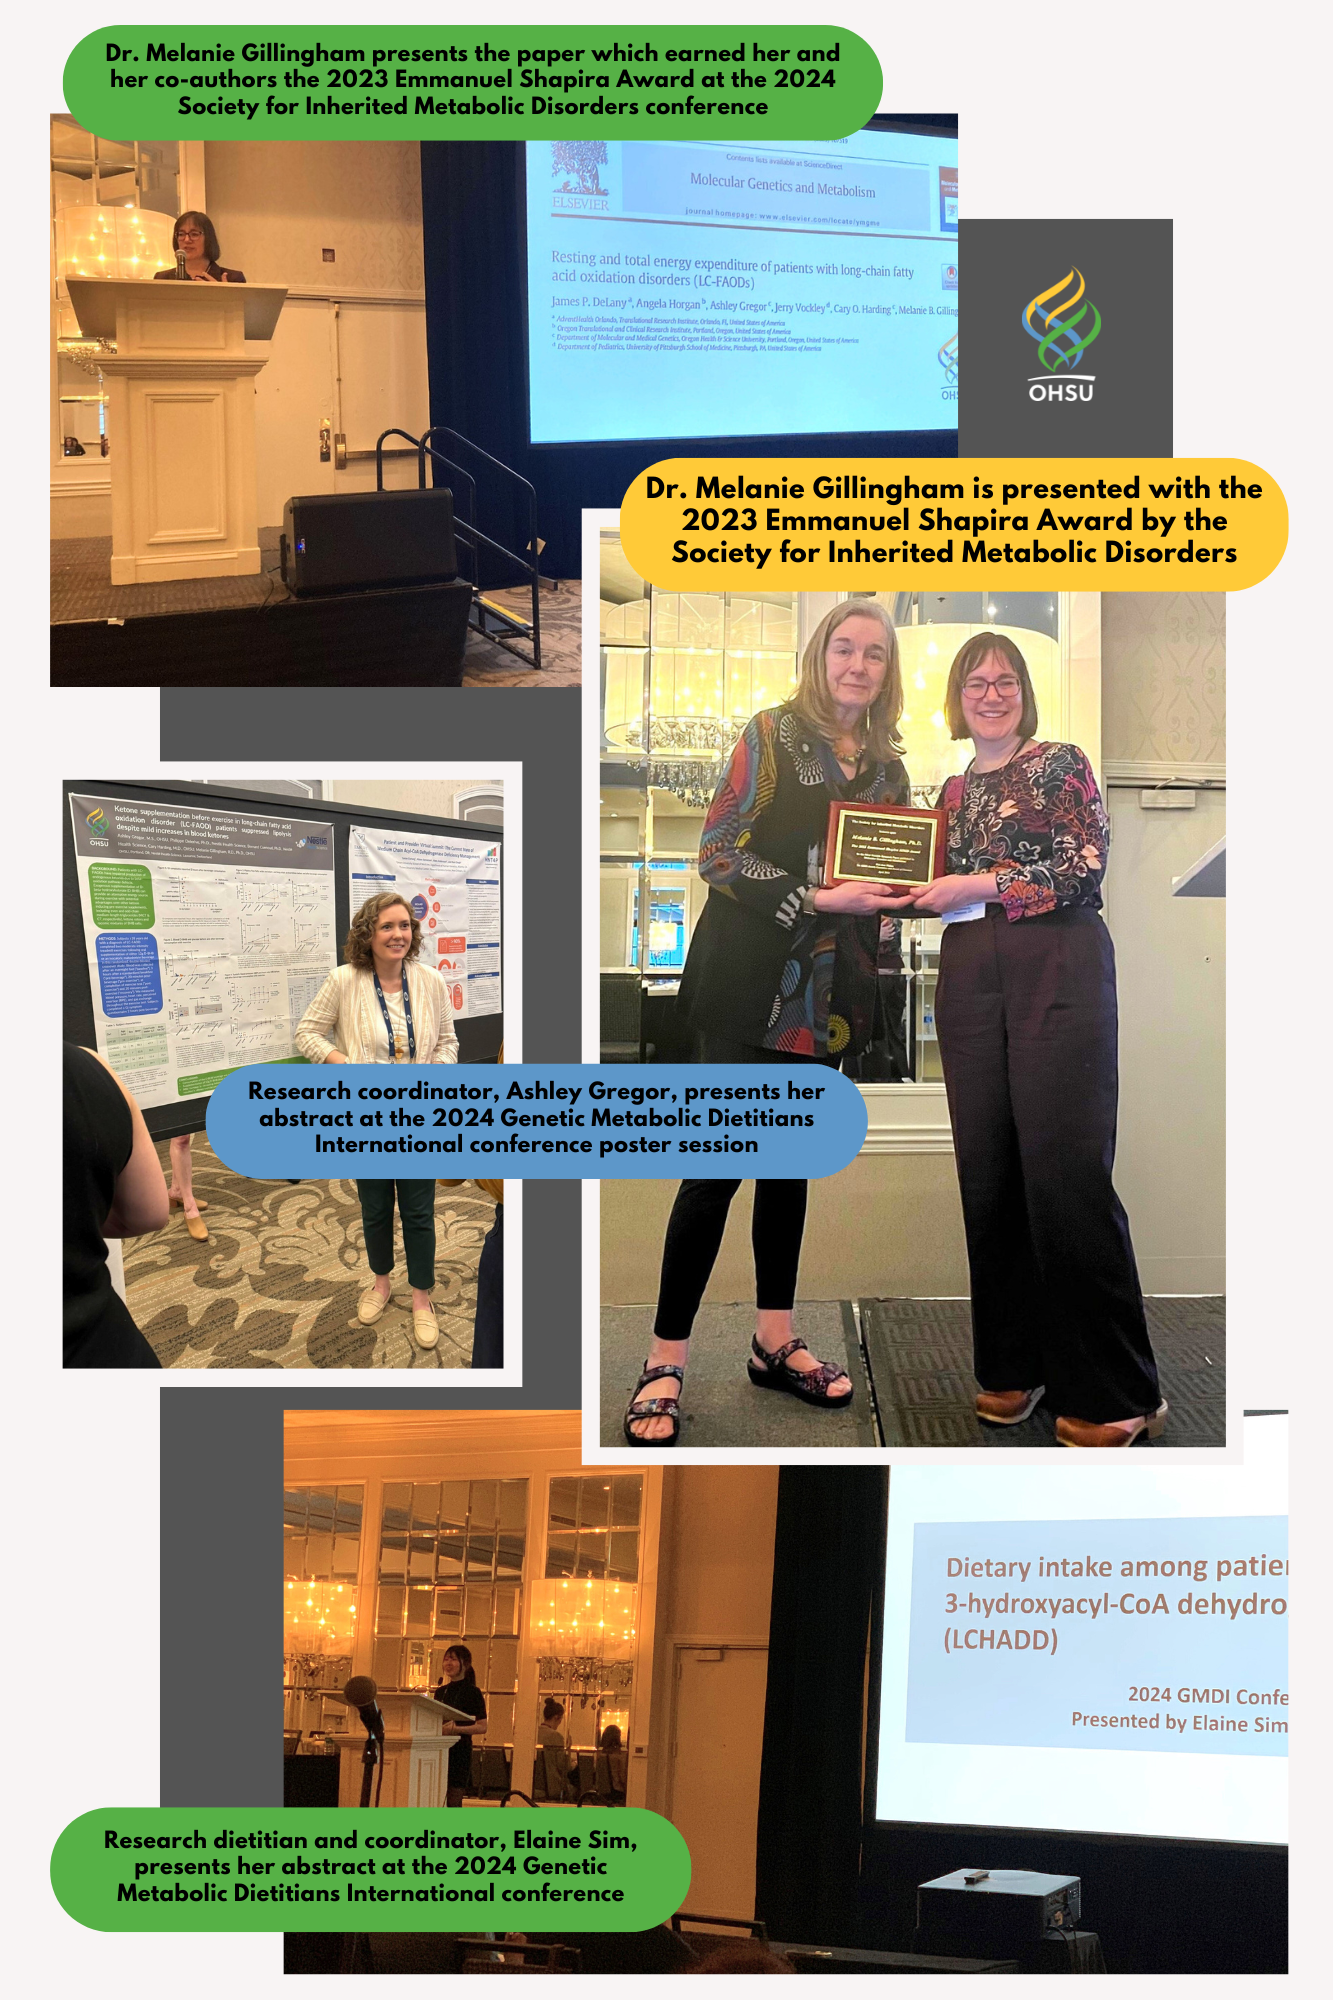 Dr. Melanie Gillingham presenting the paper that earned the 2023 Emmanuel Shapira Award and being presented the award at the 2024 SIMD conference. Ashley Gregor and Elaine Sim presenting their abstracts at the 2024 GMDI conference.